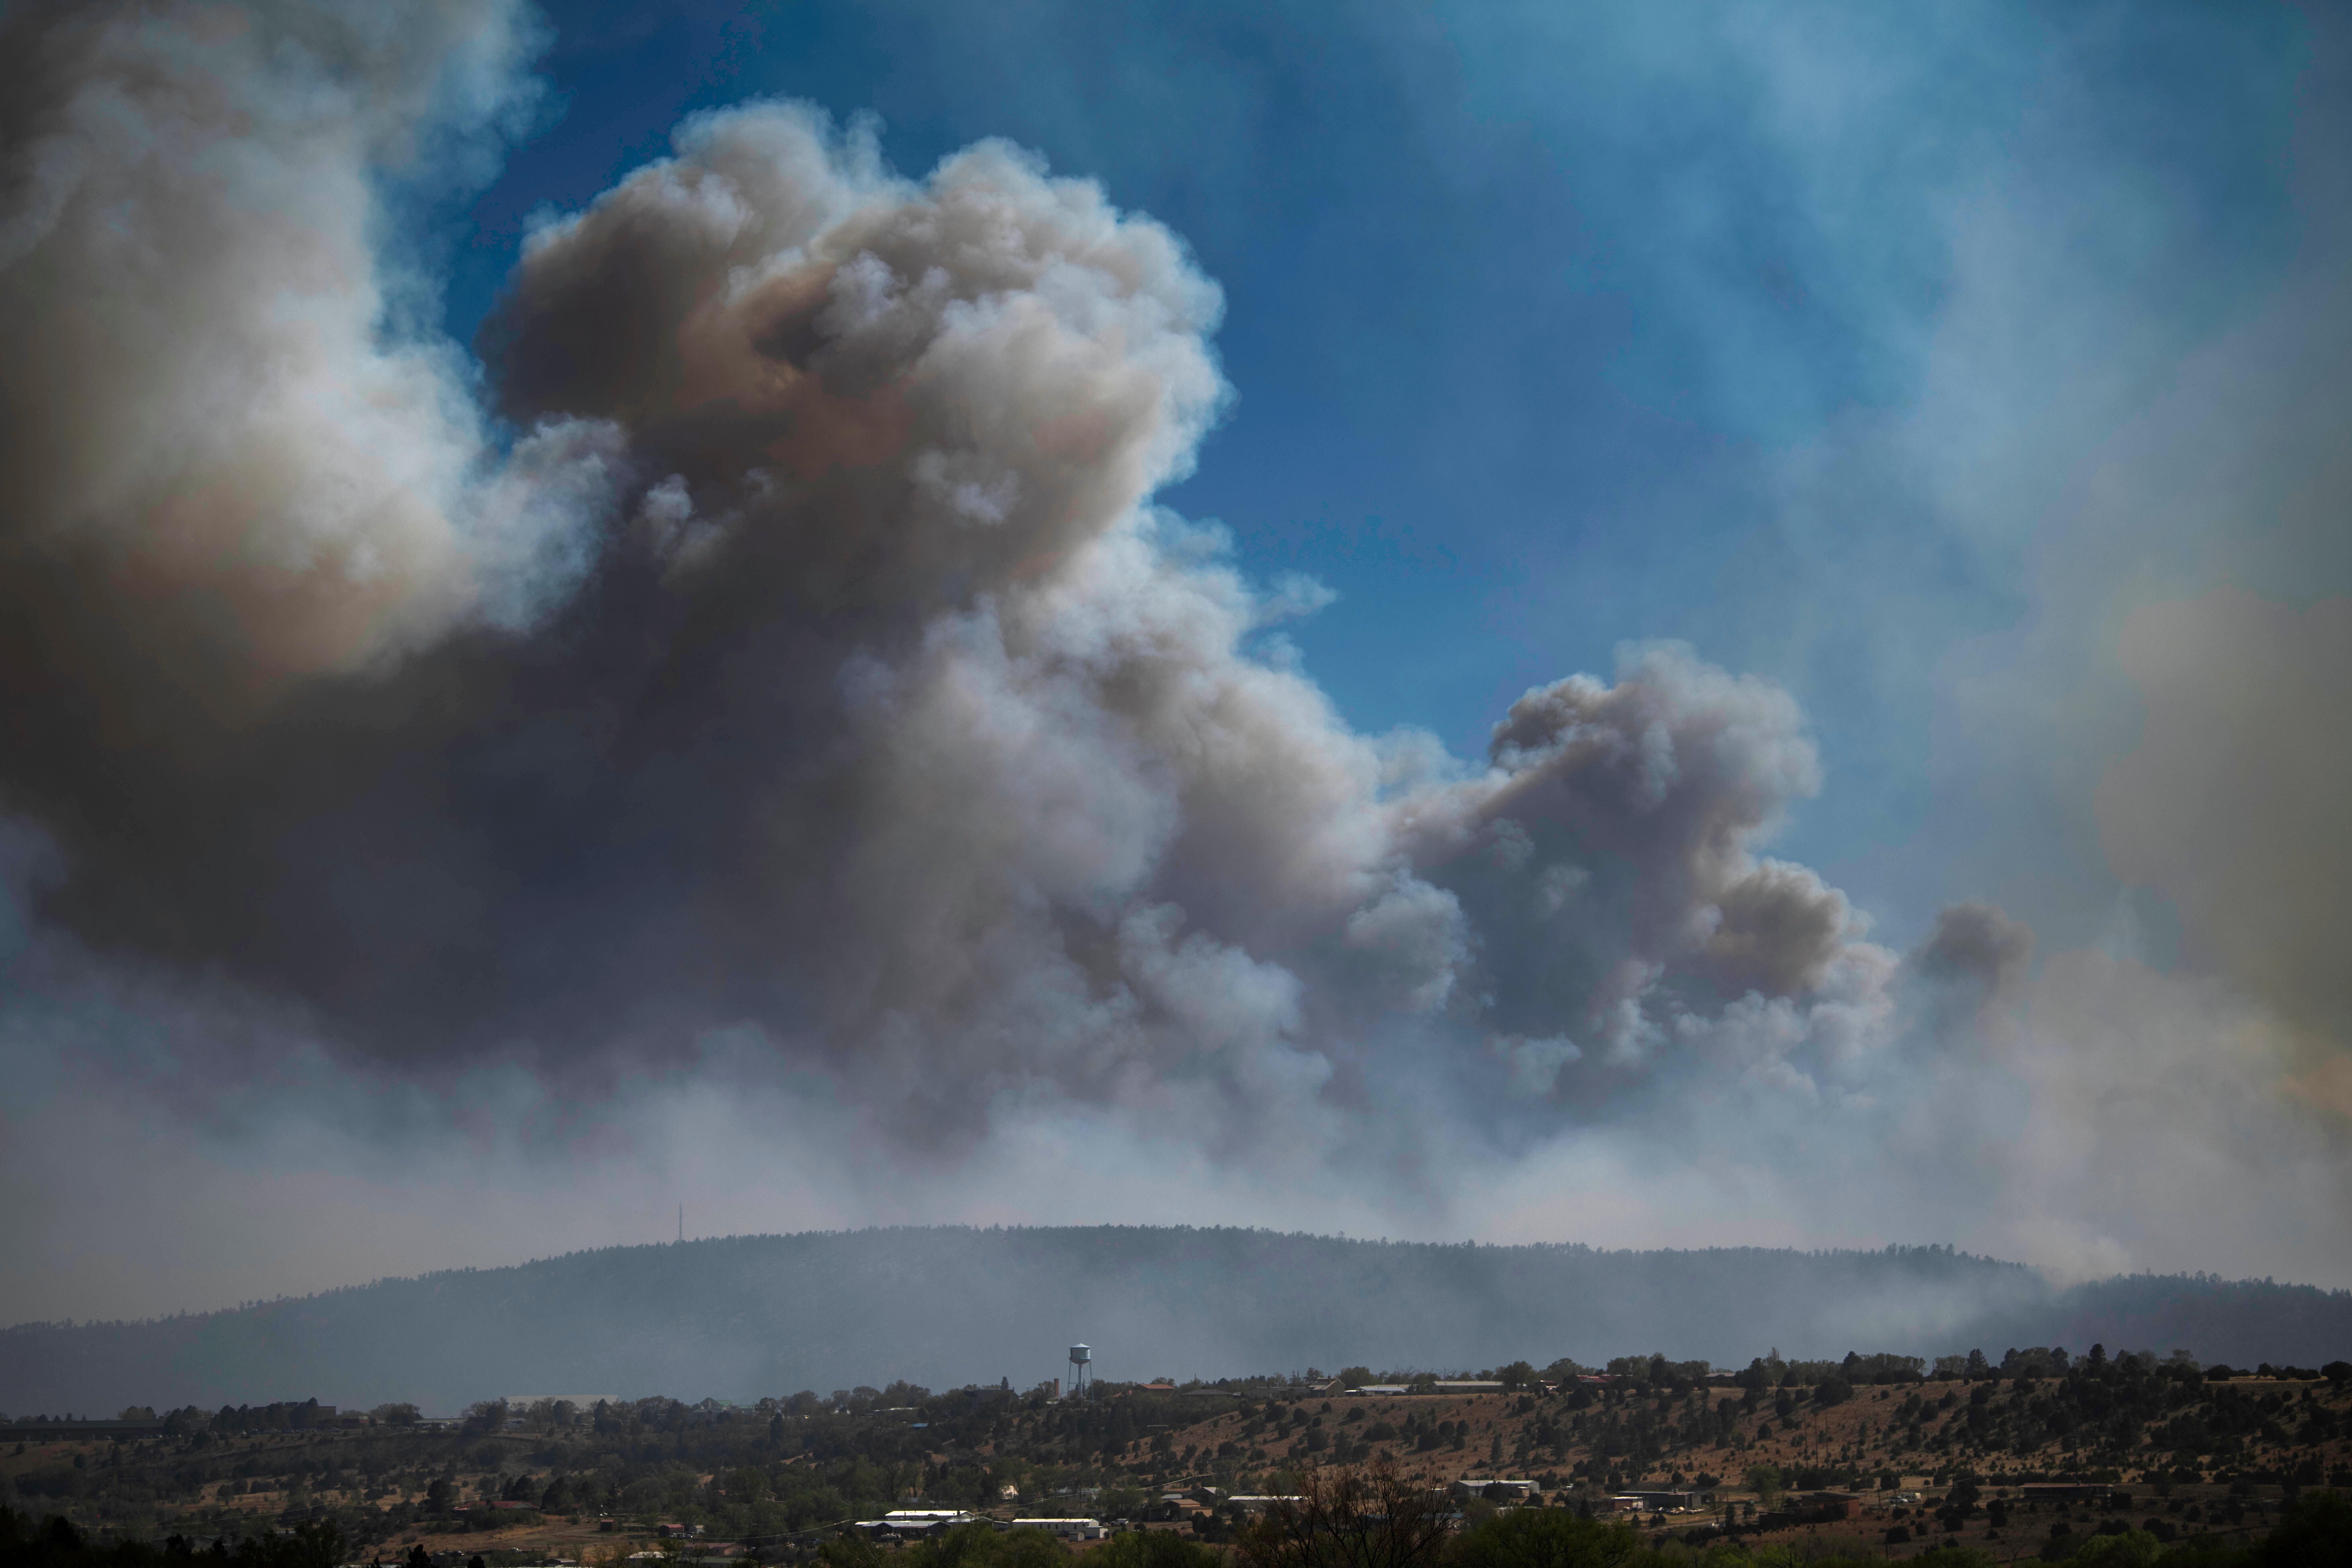 Smoke from the New Mexico fires is causing poor air quality across the region. (Photo: ROBERTO E. ROSALES, AP)